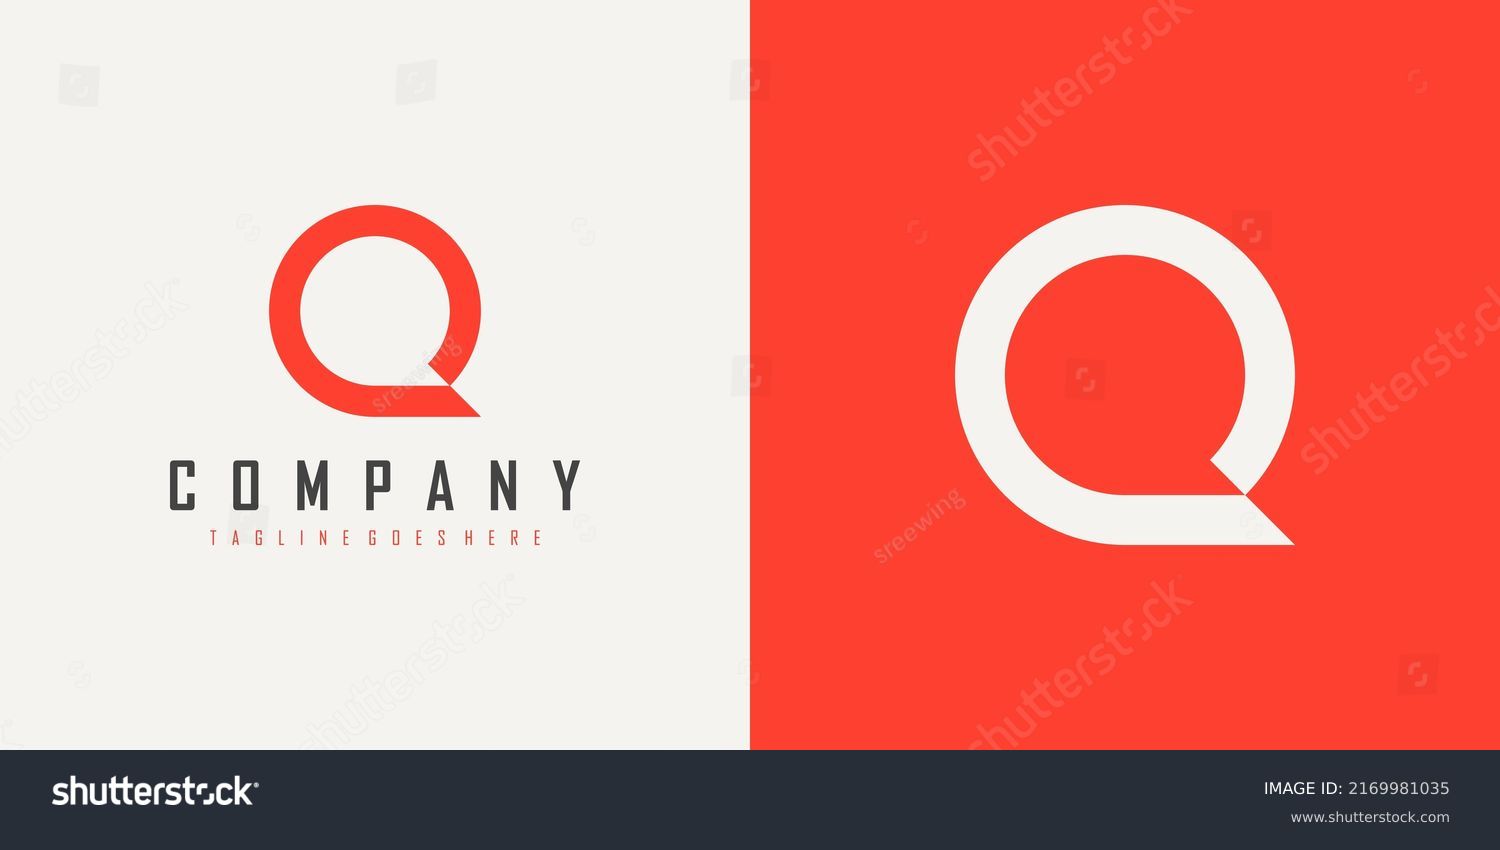 Simple Initial Letter Q Logo isolated on Double Background. Usable for Business and Branding Logos. Flat Vector Logo Design Template Element. #2169981035